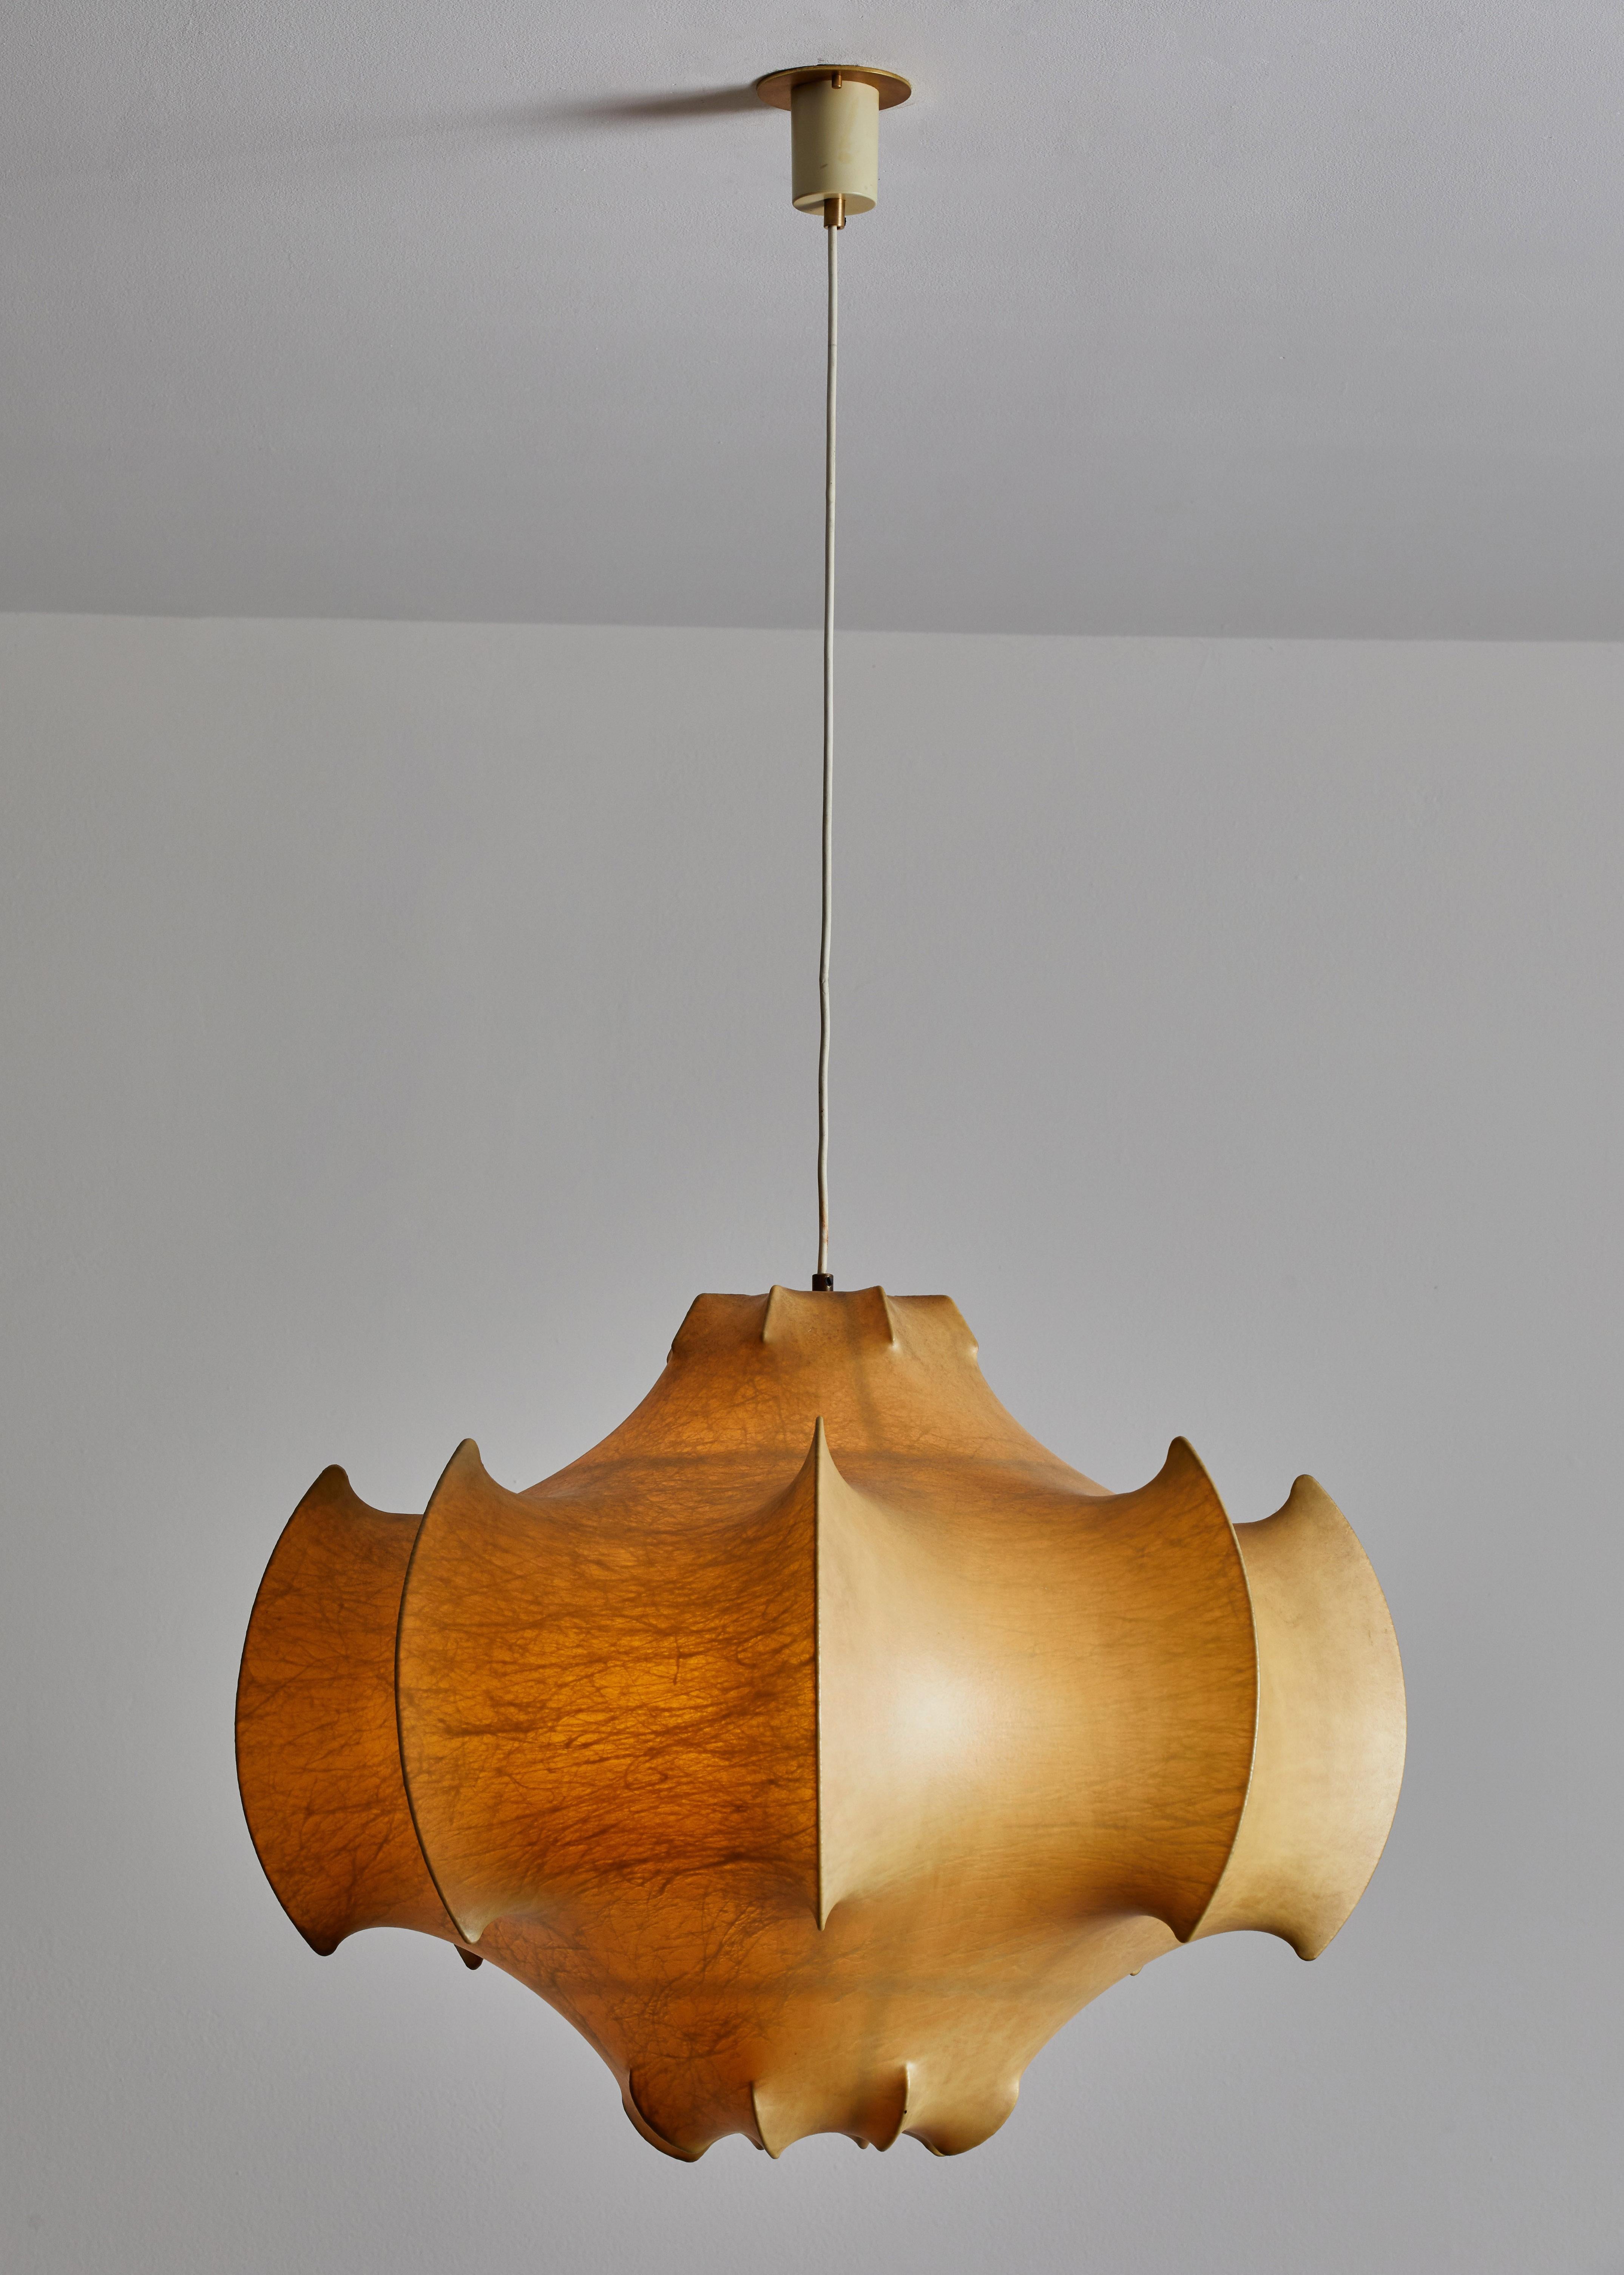 Original Viscontea suspension light by Achille & Pier Giacomo Castiglioni for Flos. Designed and manufactured in Italy, circa 1960s. Plastic polymer resin applied with spraying technique on to enameled iron frame. Rewired for US junction boxes.